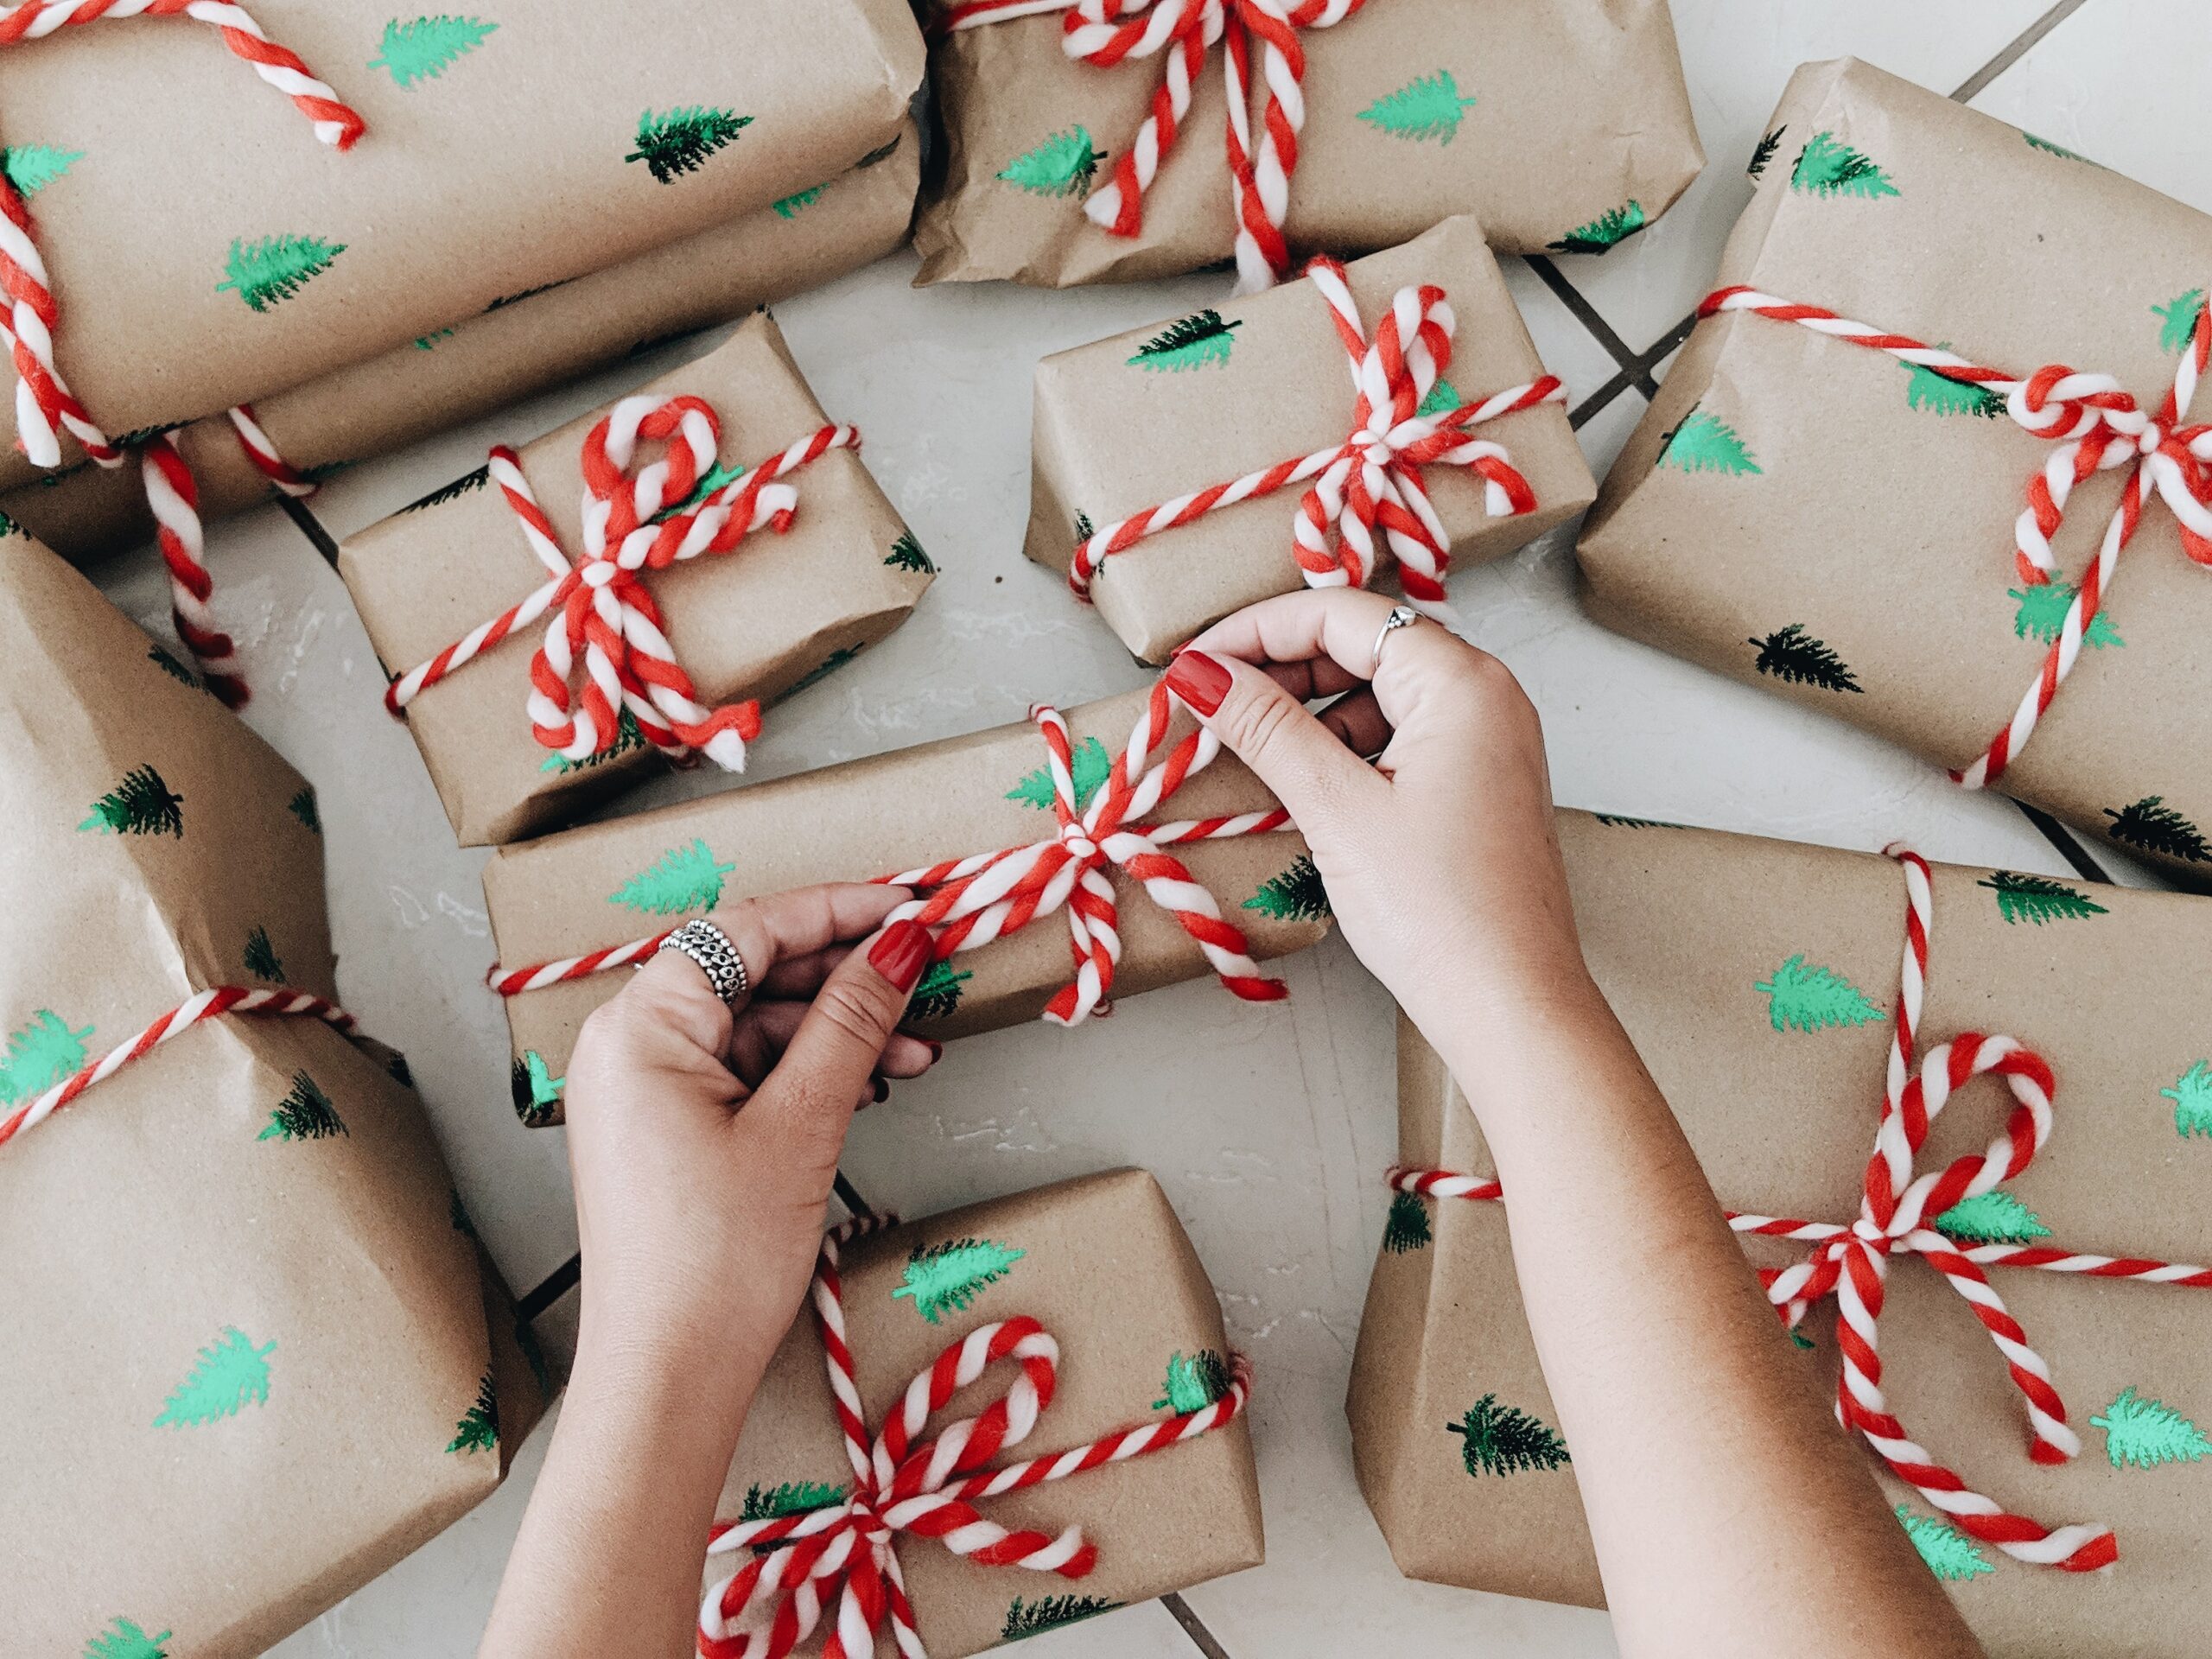 7 Easy Ways for Christmas Shopping on a Budget